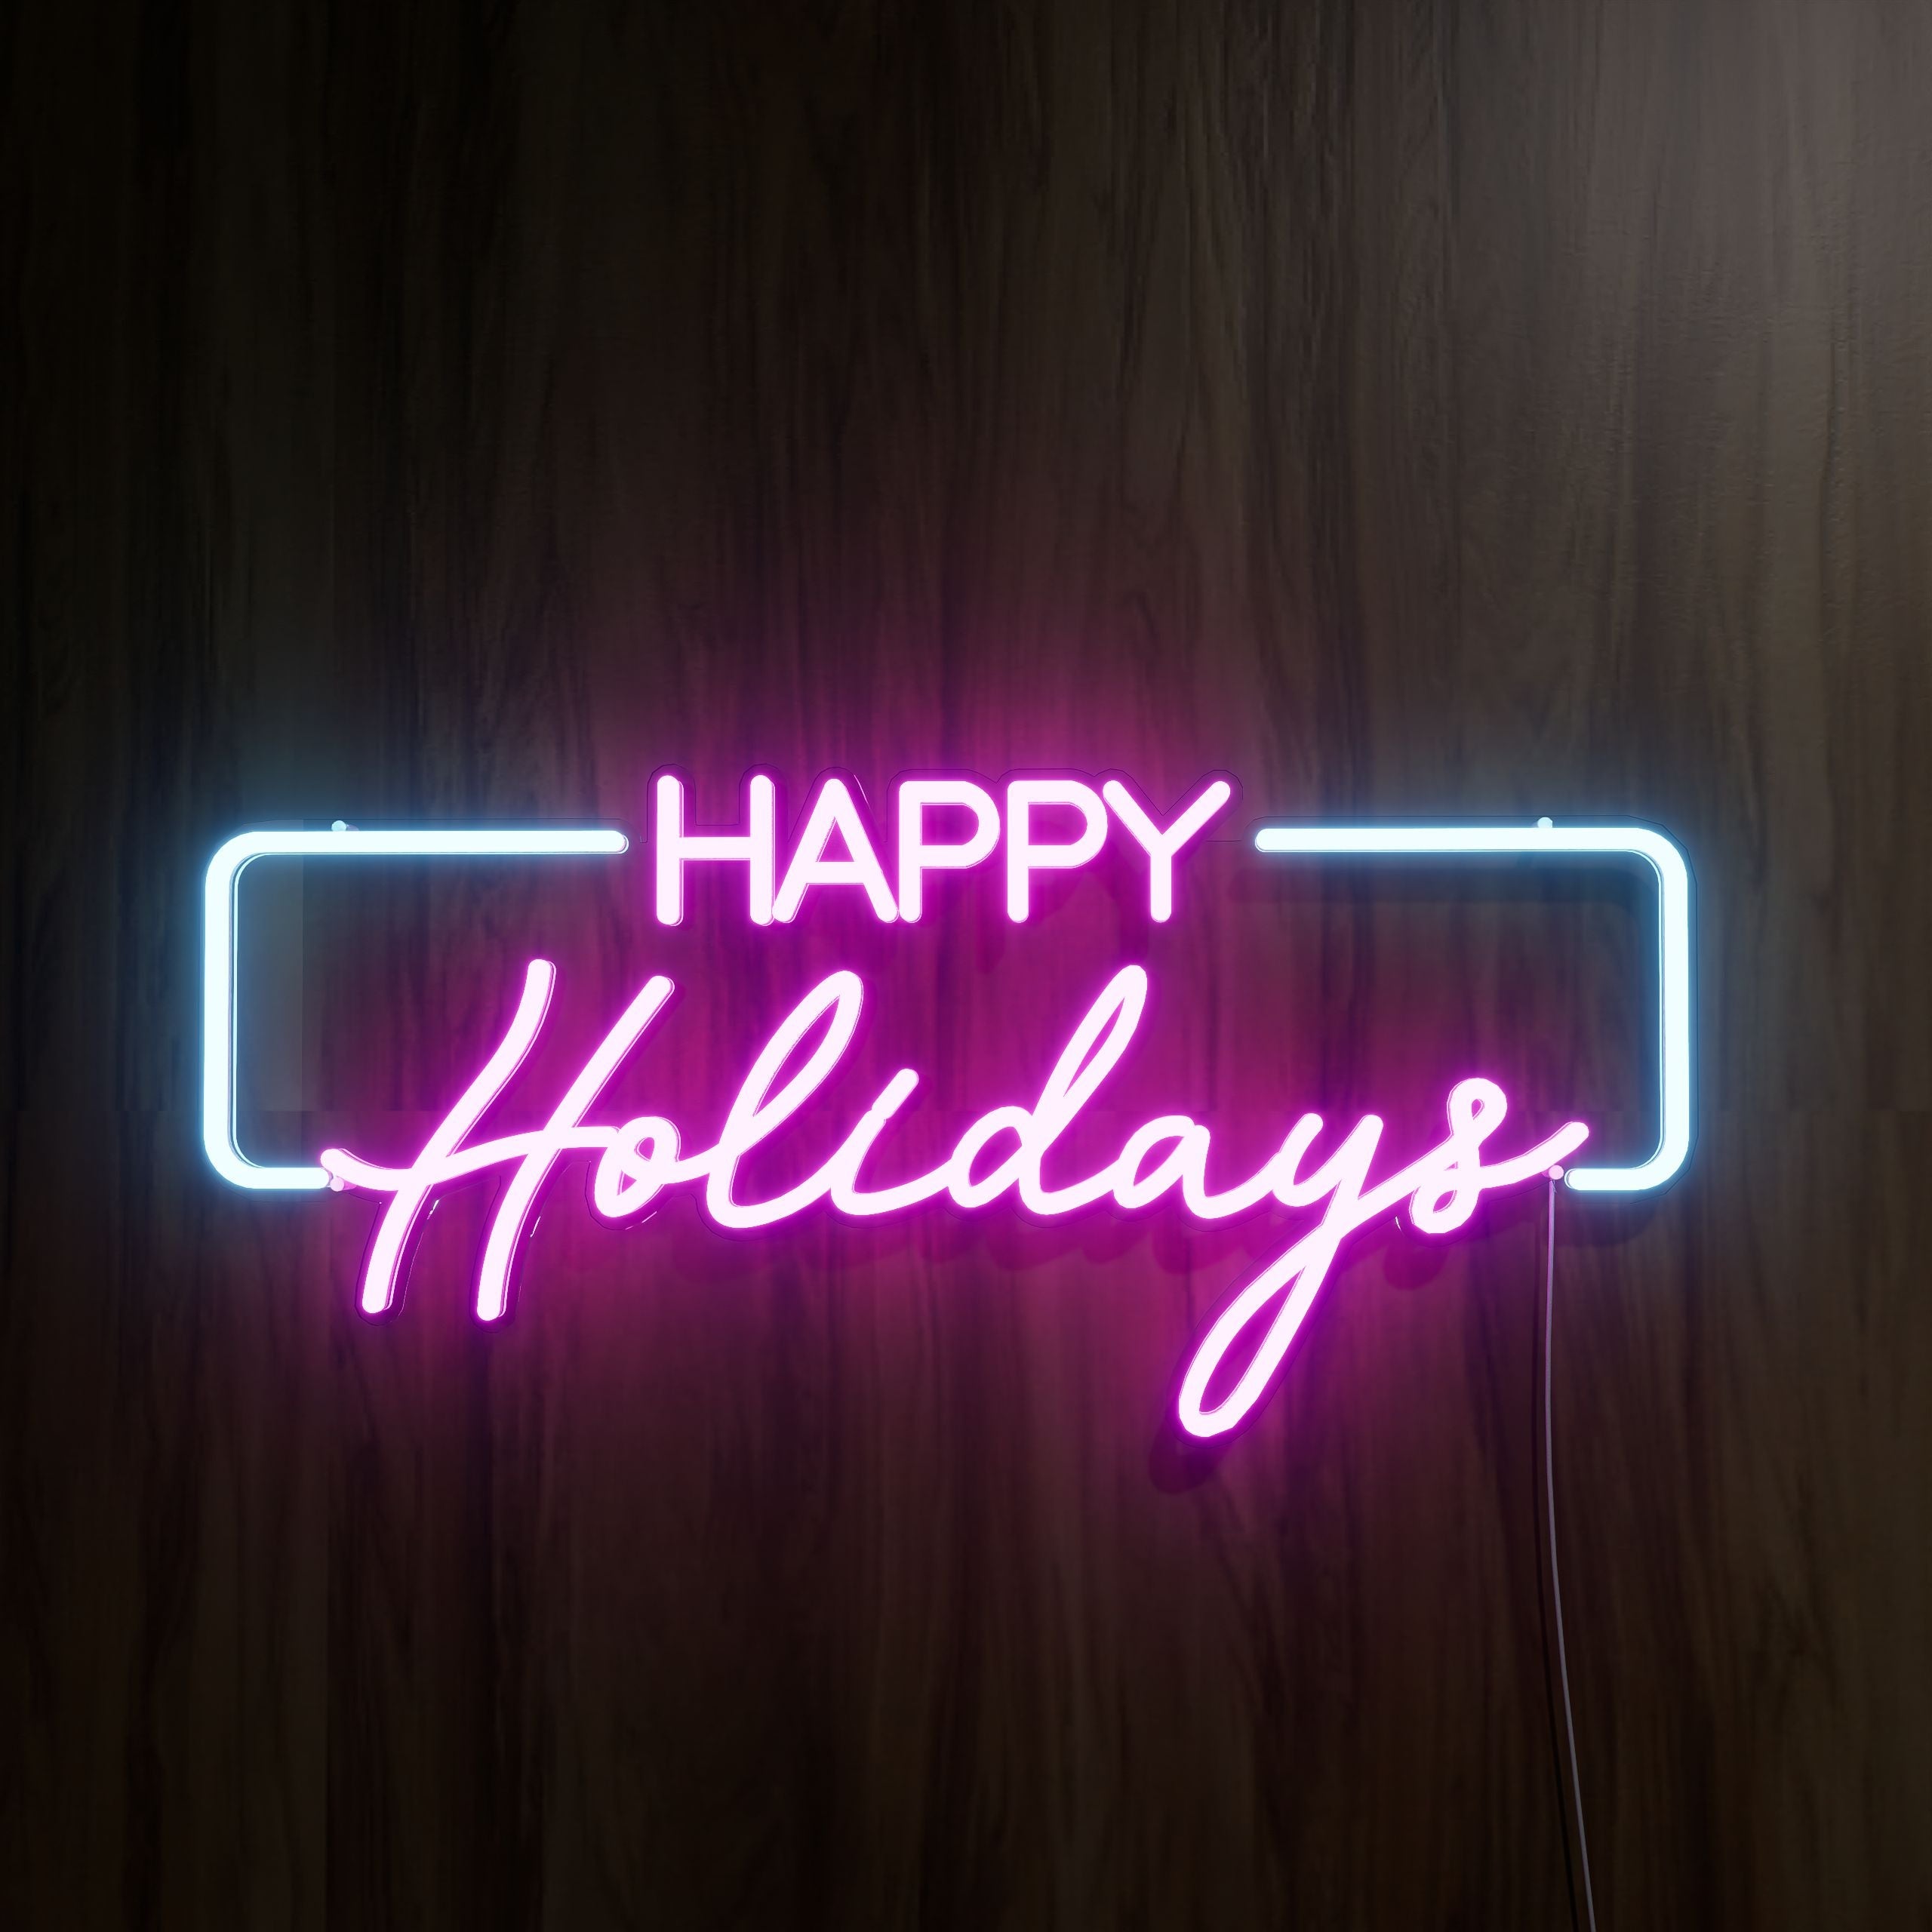 festive-holiday-greetings-neon-sign-lite